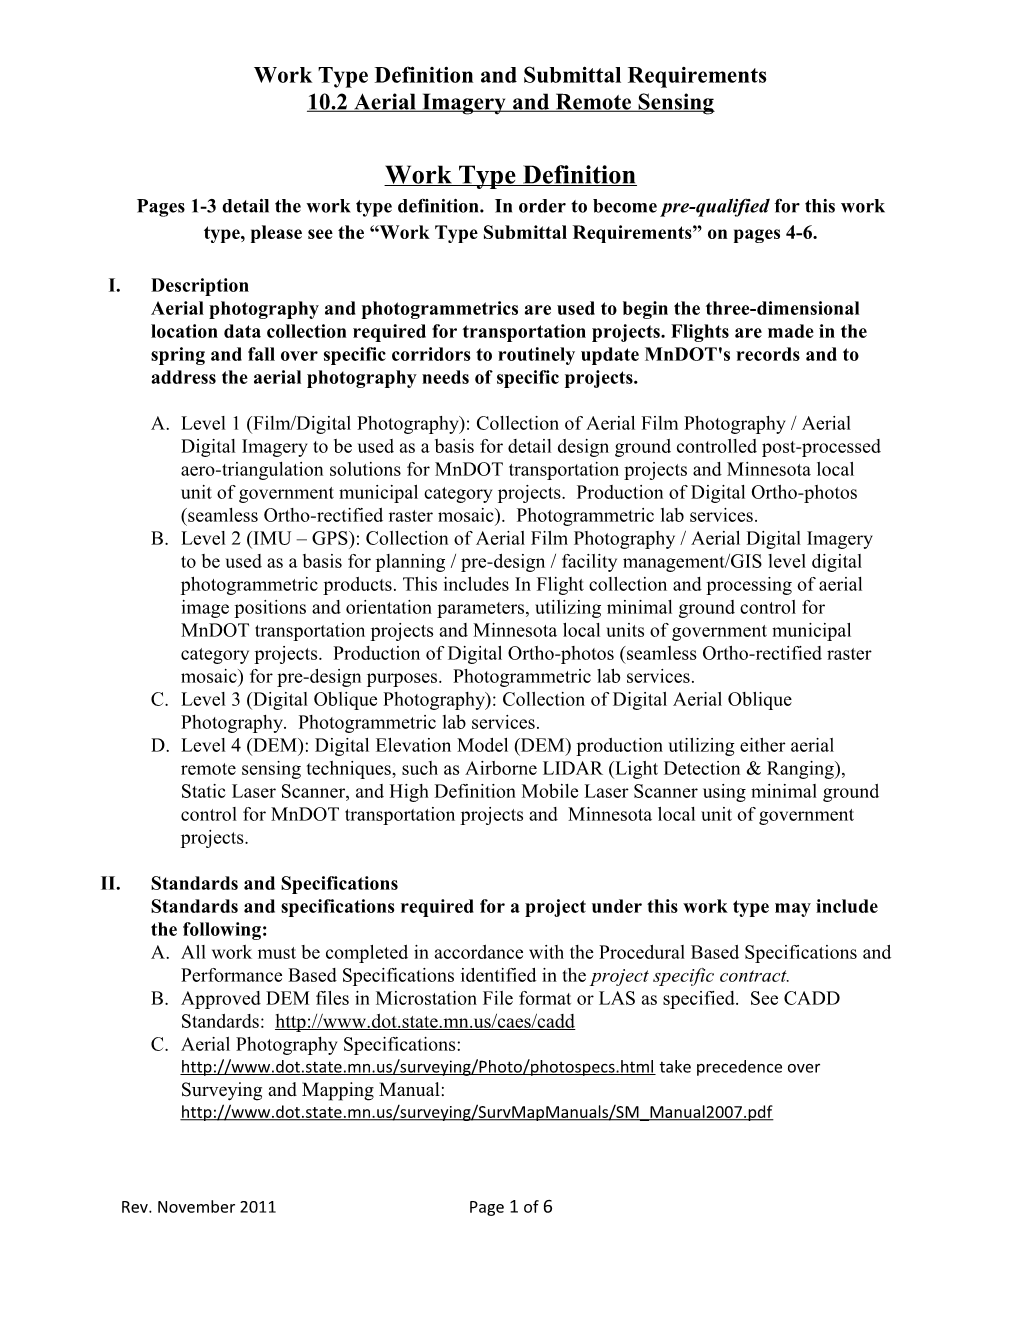 Work Type Definition and Submittal Requirements s1